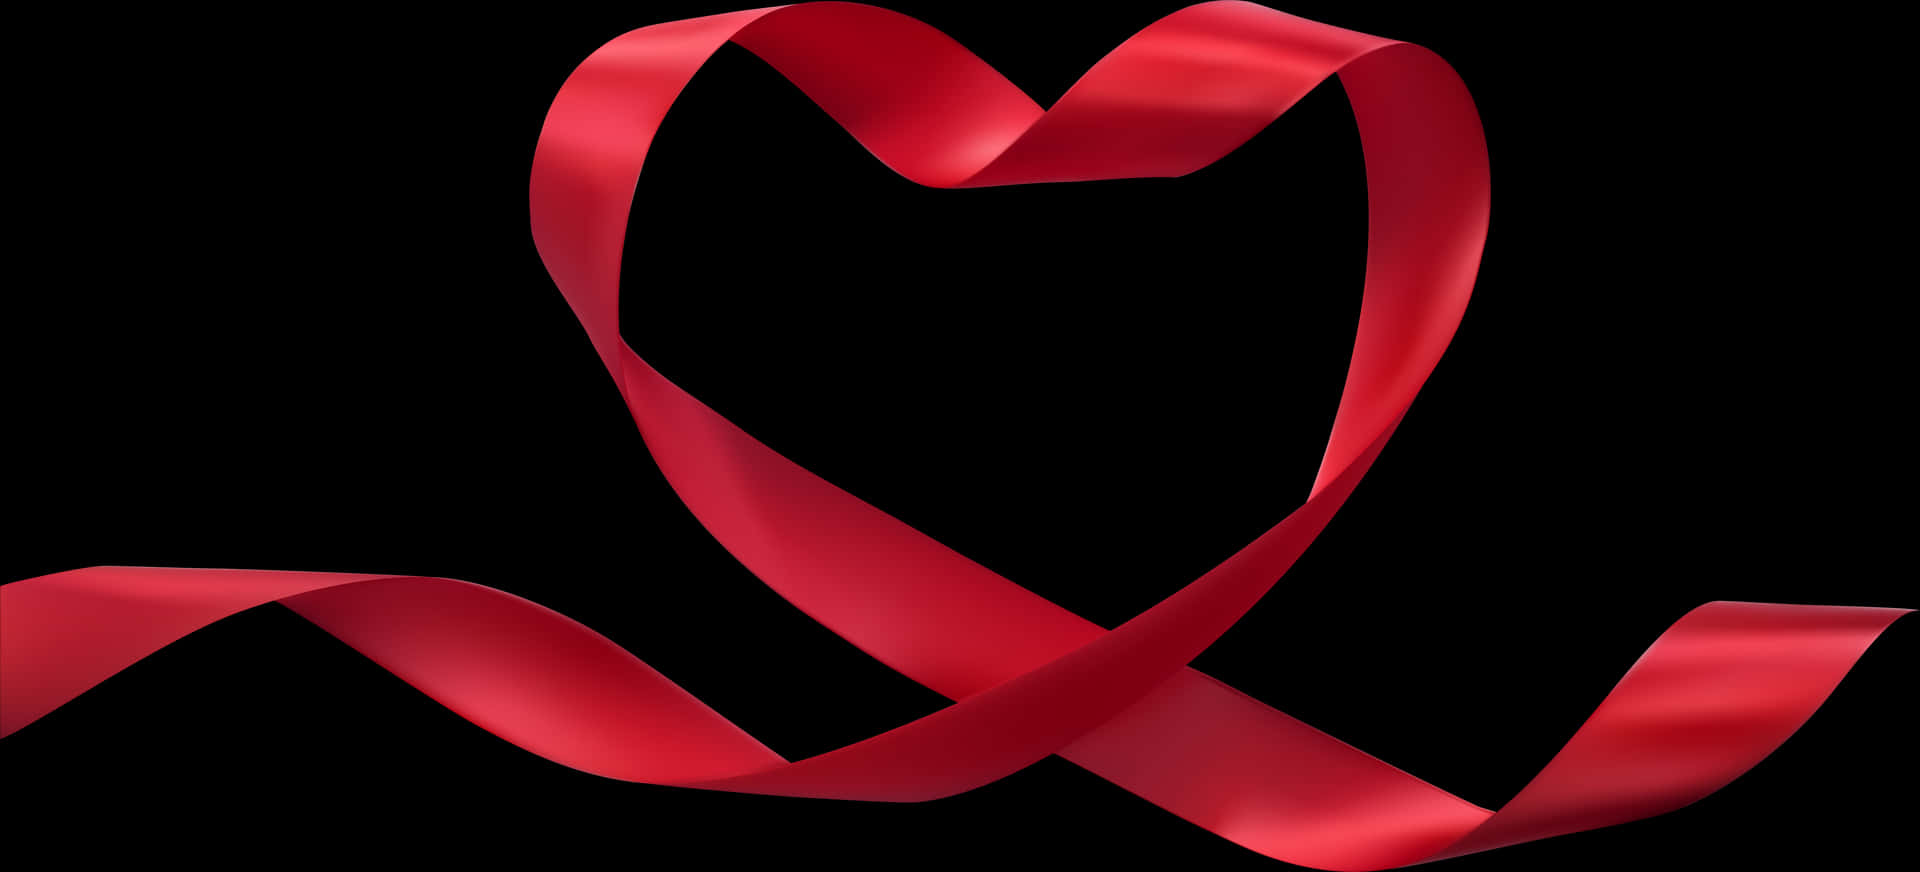 Red Ribbon Heart Shapeon Black Background PNG